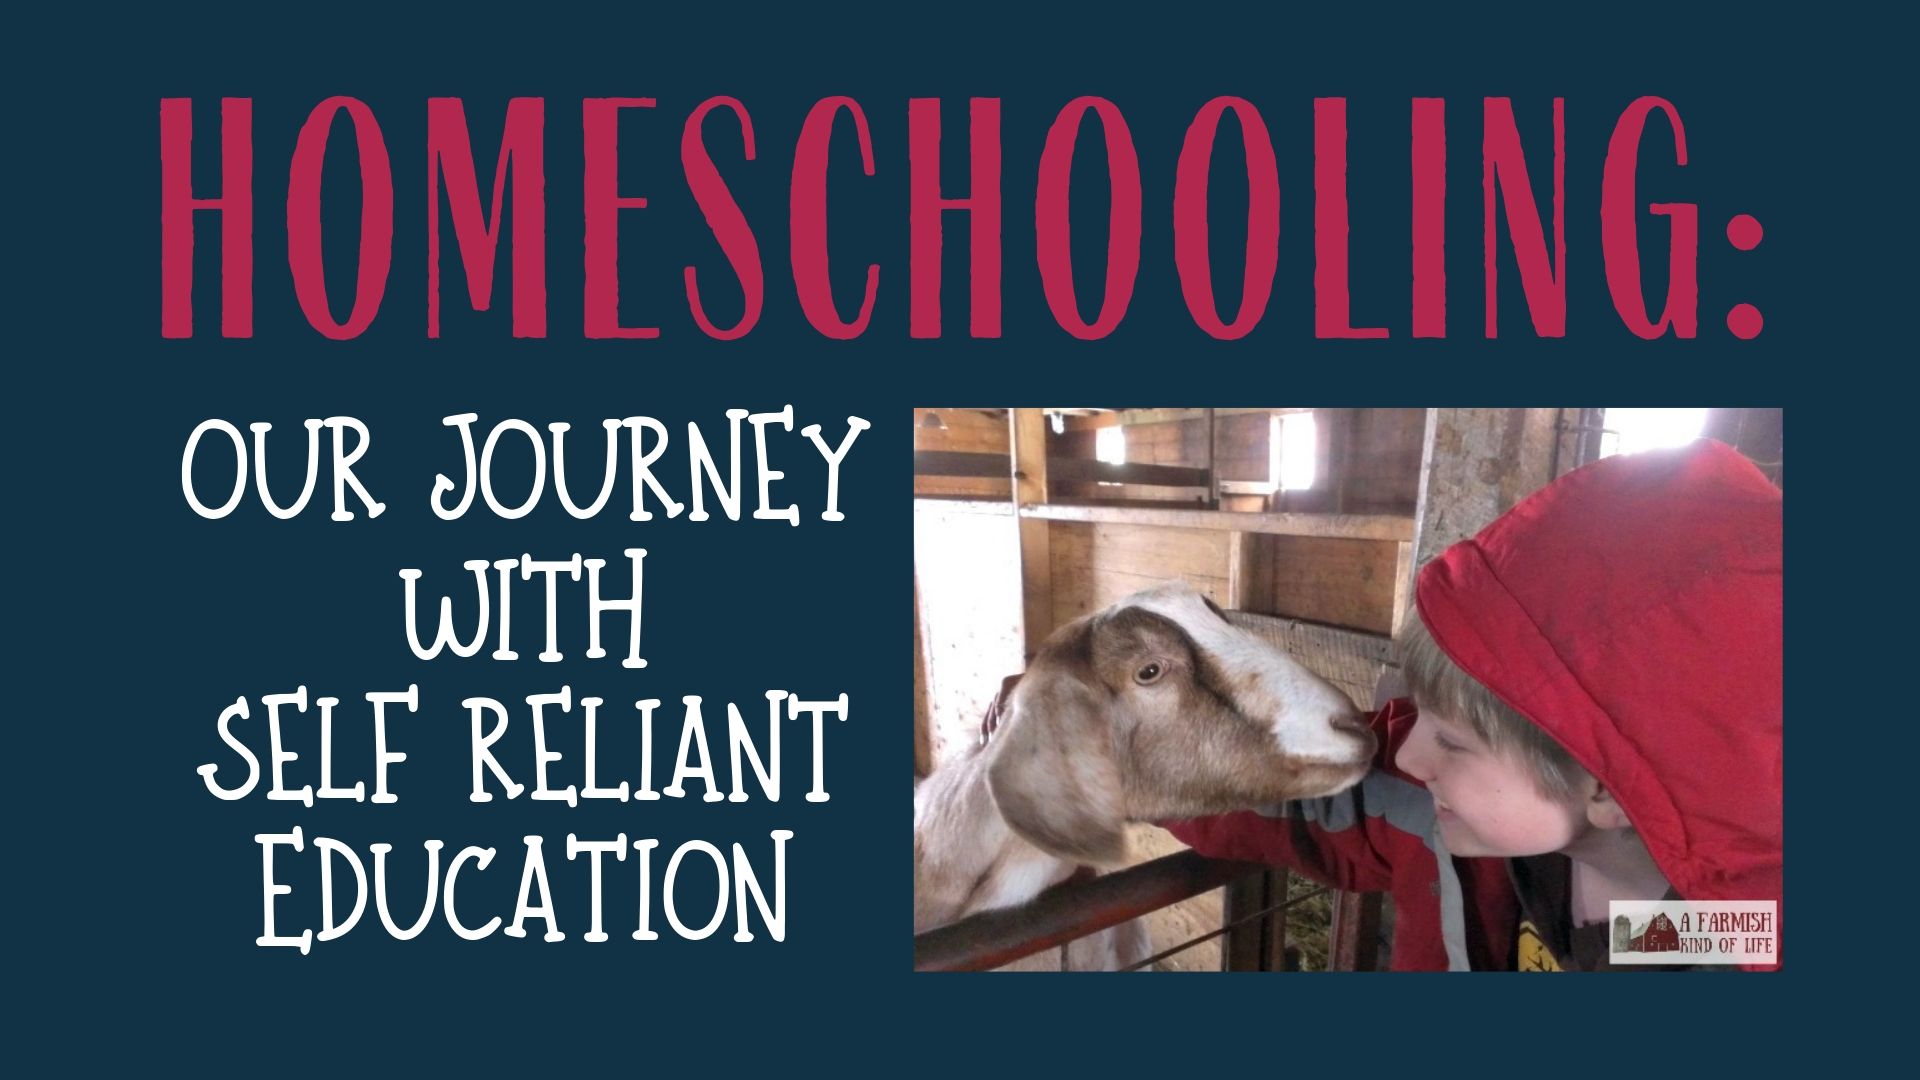 059: Homeschooling – Our Journey with Self Reliant Education